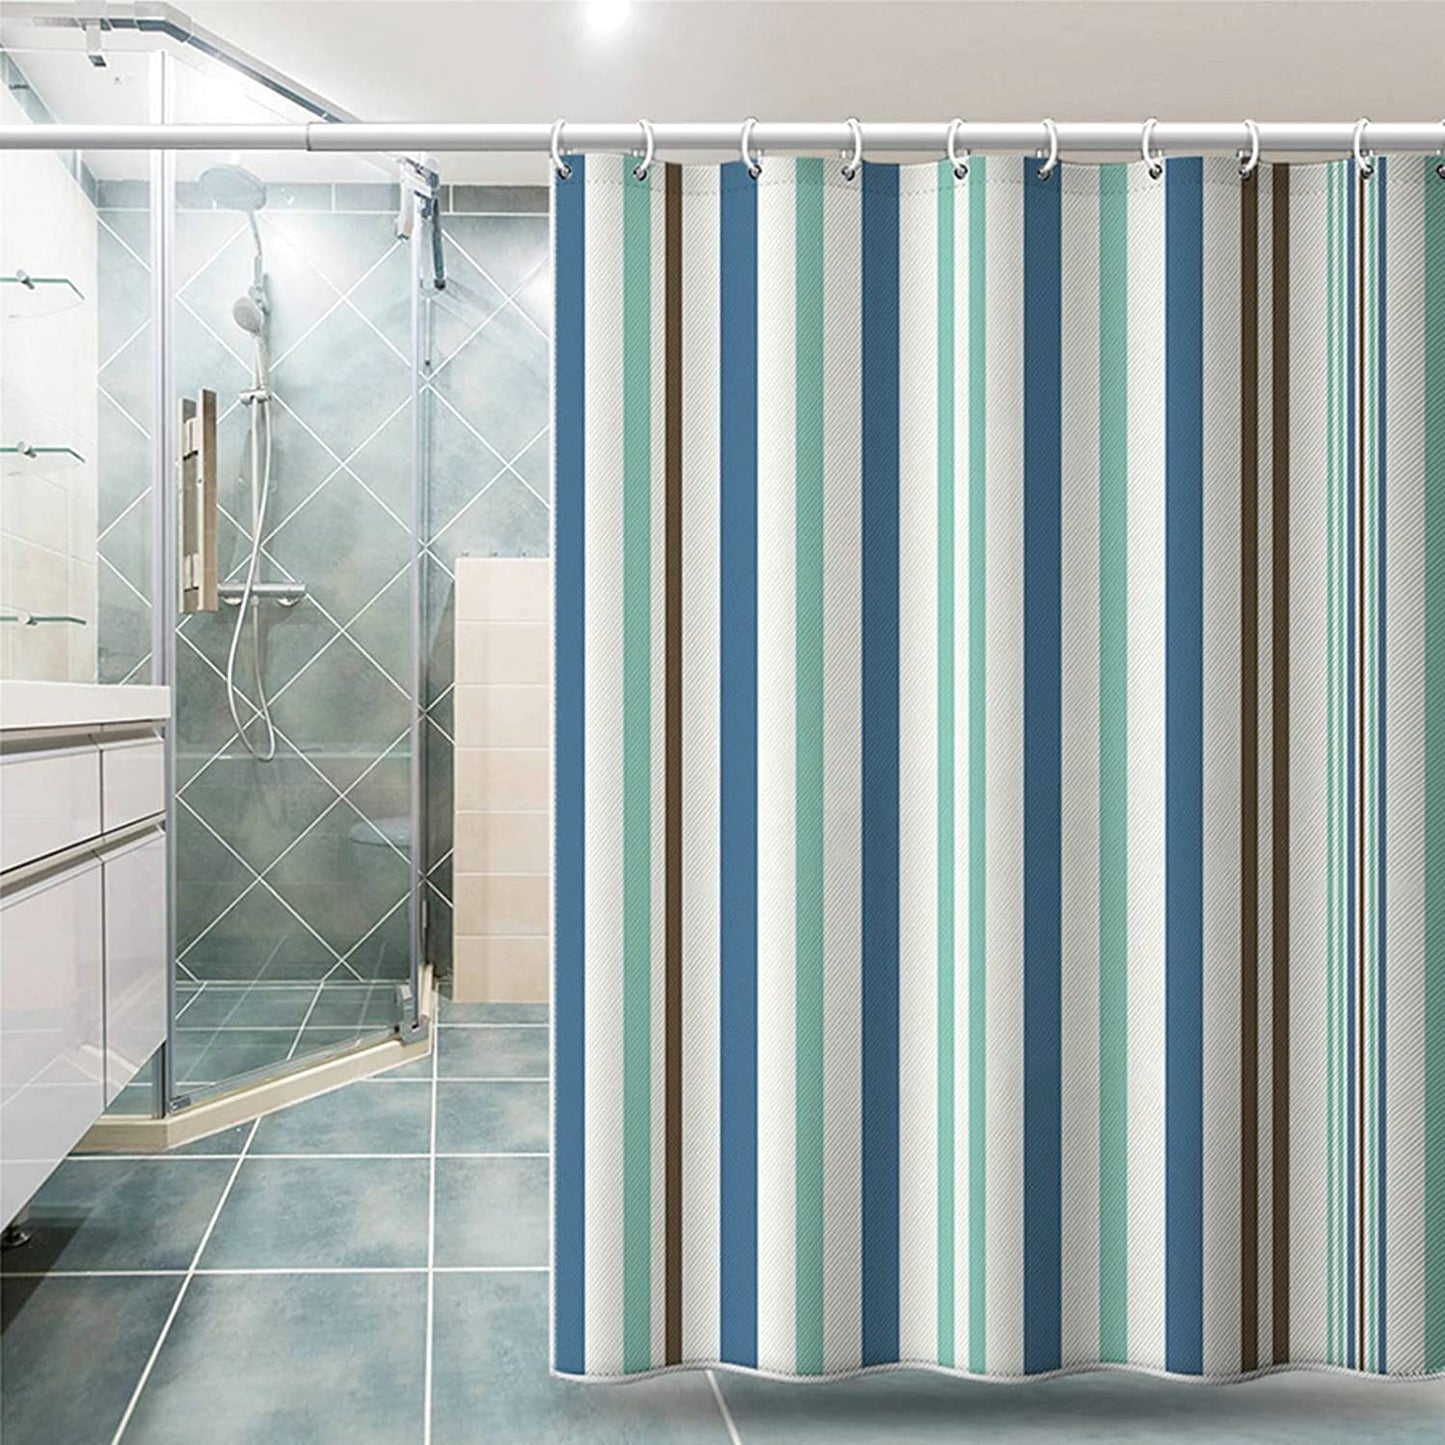 6718 Bright Vertical Stripes in The Shower Curtain (180x220cm) 